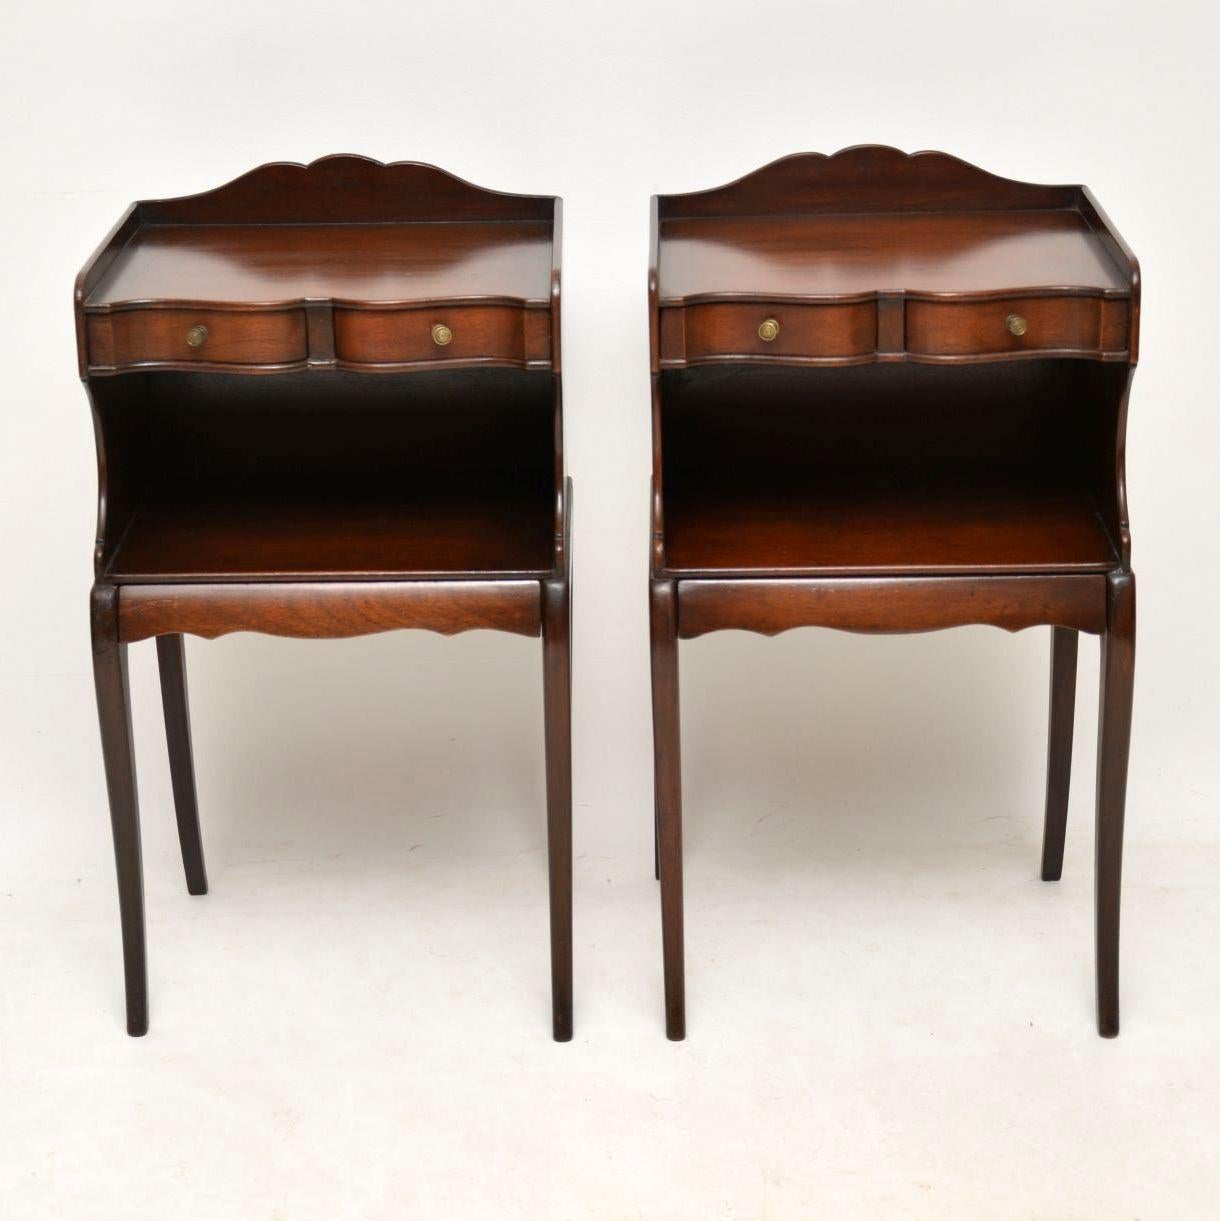 Pair of stylish antique mahogany bedside or lamp tables in the Regency style and dating from around the 1910-1920s period. They are very elegant with sabre legs on the backs and fronts. There are two shaped narrow drawers on the tops and another